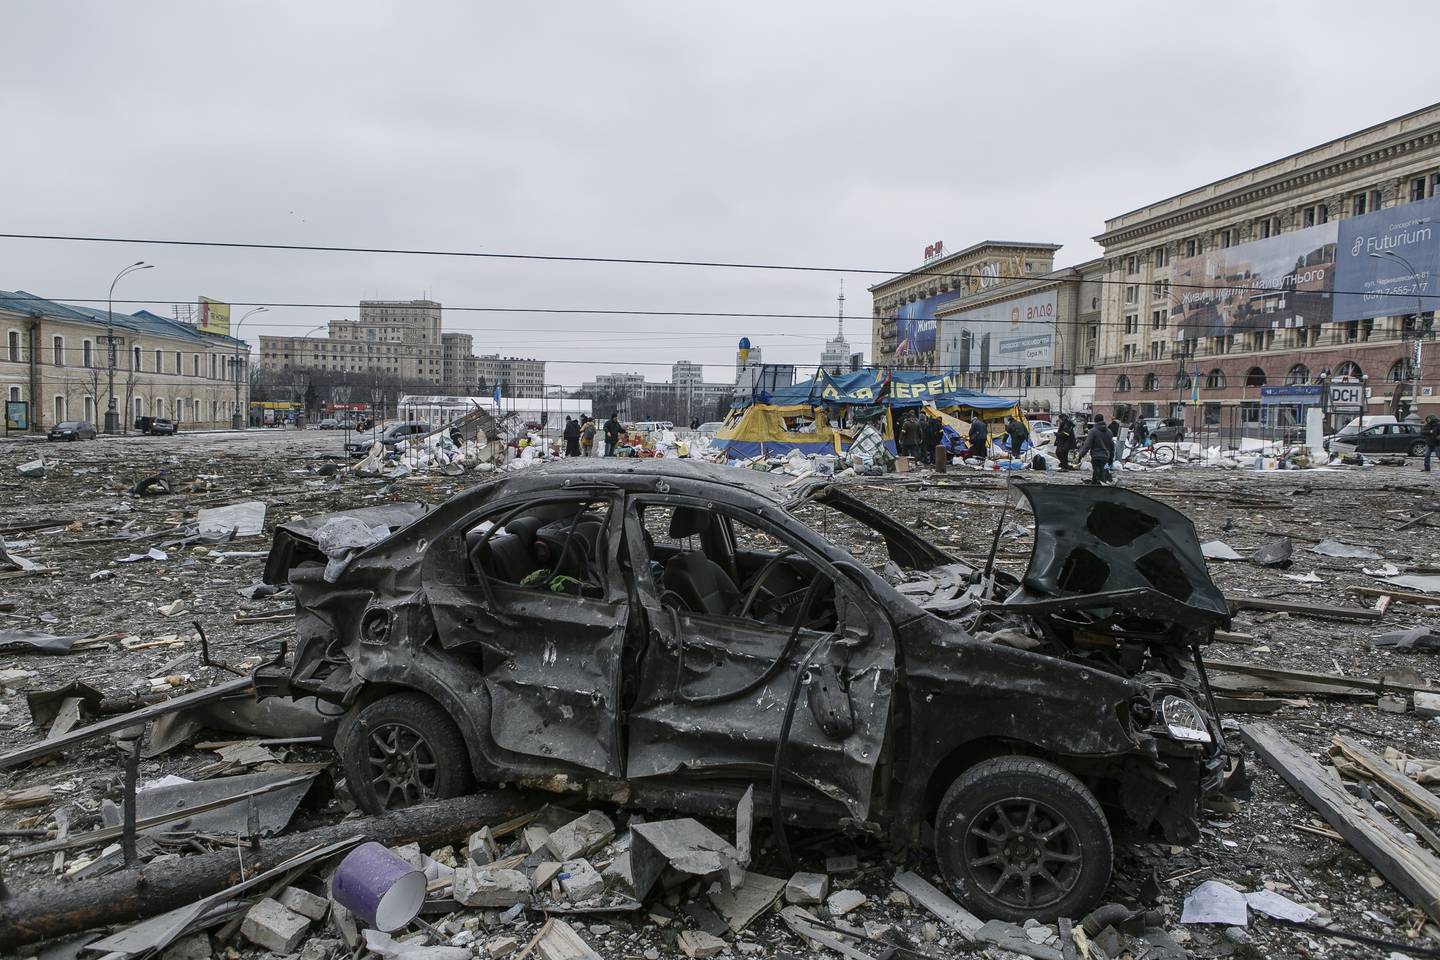 A view of the central square following shelling of the City Hall building in Kharkiv, Ukraine, Tuesday, March 1, 2022. Russia on Tuesday stepped up shelling of Kharkiv, Ukraine's second-largest city, pounding civilian targets there. Casualties mounted and reports emerged that more than 70 Ukrainian soldiers were killed after Russian artillery recently hit a military base in Okhtyrka, a city between Kharkiv and Kyiv, the capital. (AP Photo/Pavel Dorogoy)